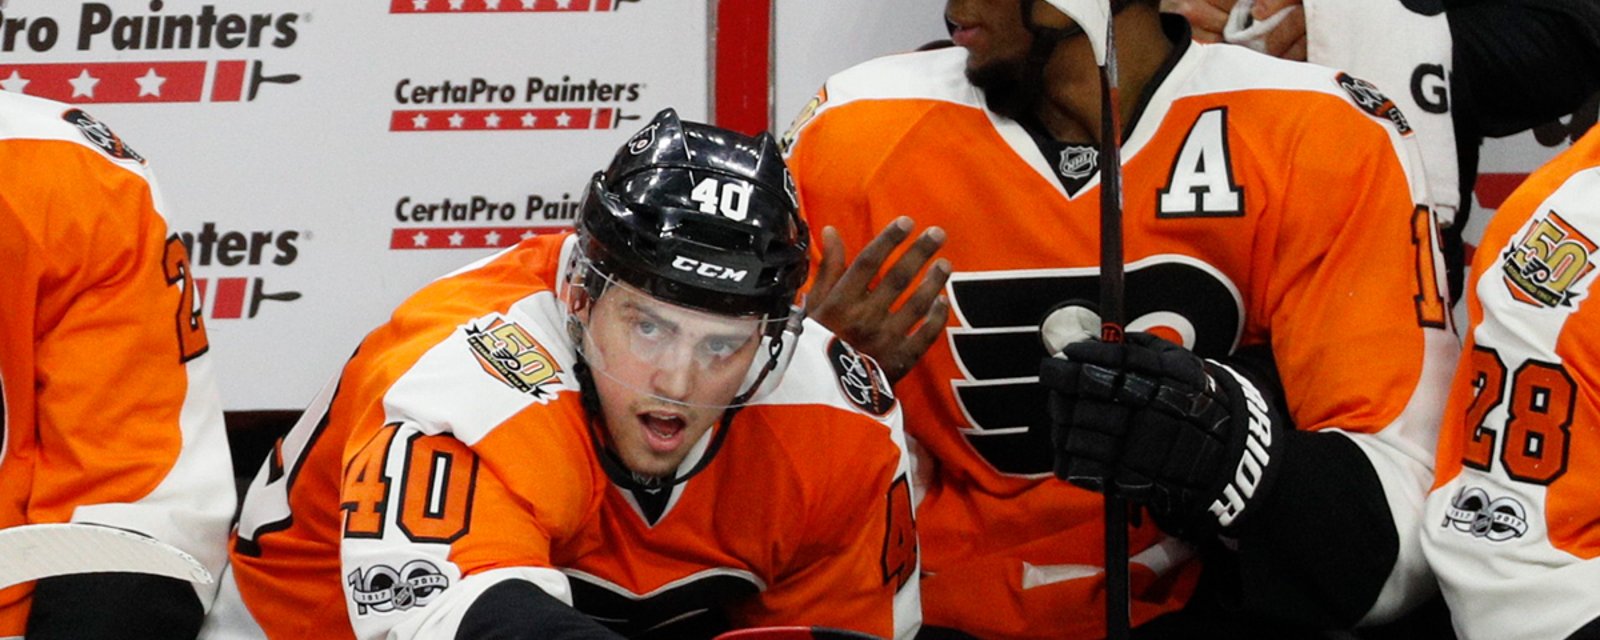 Breaking: Another Flyers player ruled out of today's game!